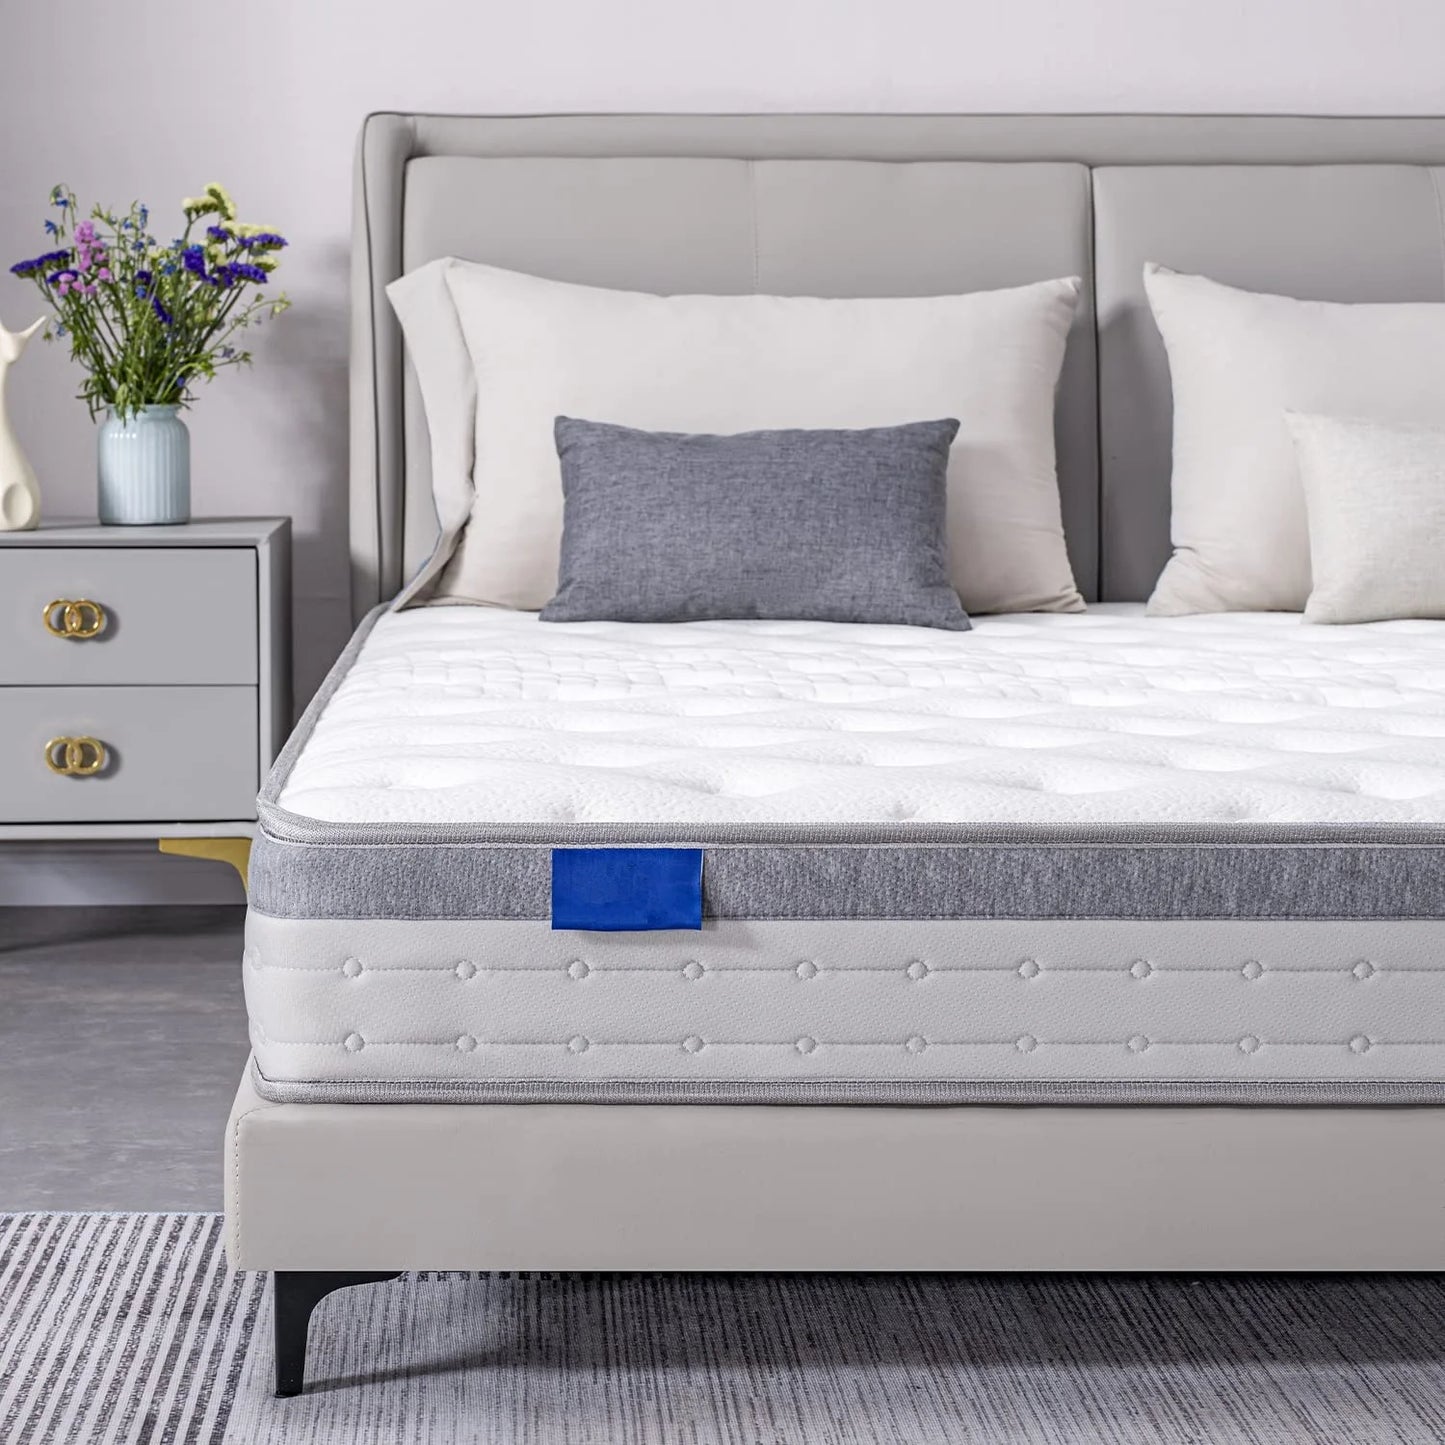 Orthopedic Super King Size Queen Bed Mattresses 13 Inch Cooling Gel-infused Foam latex pocket spring  Mattress rolling in a Box